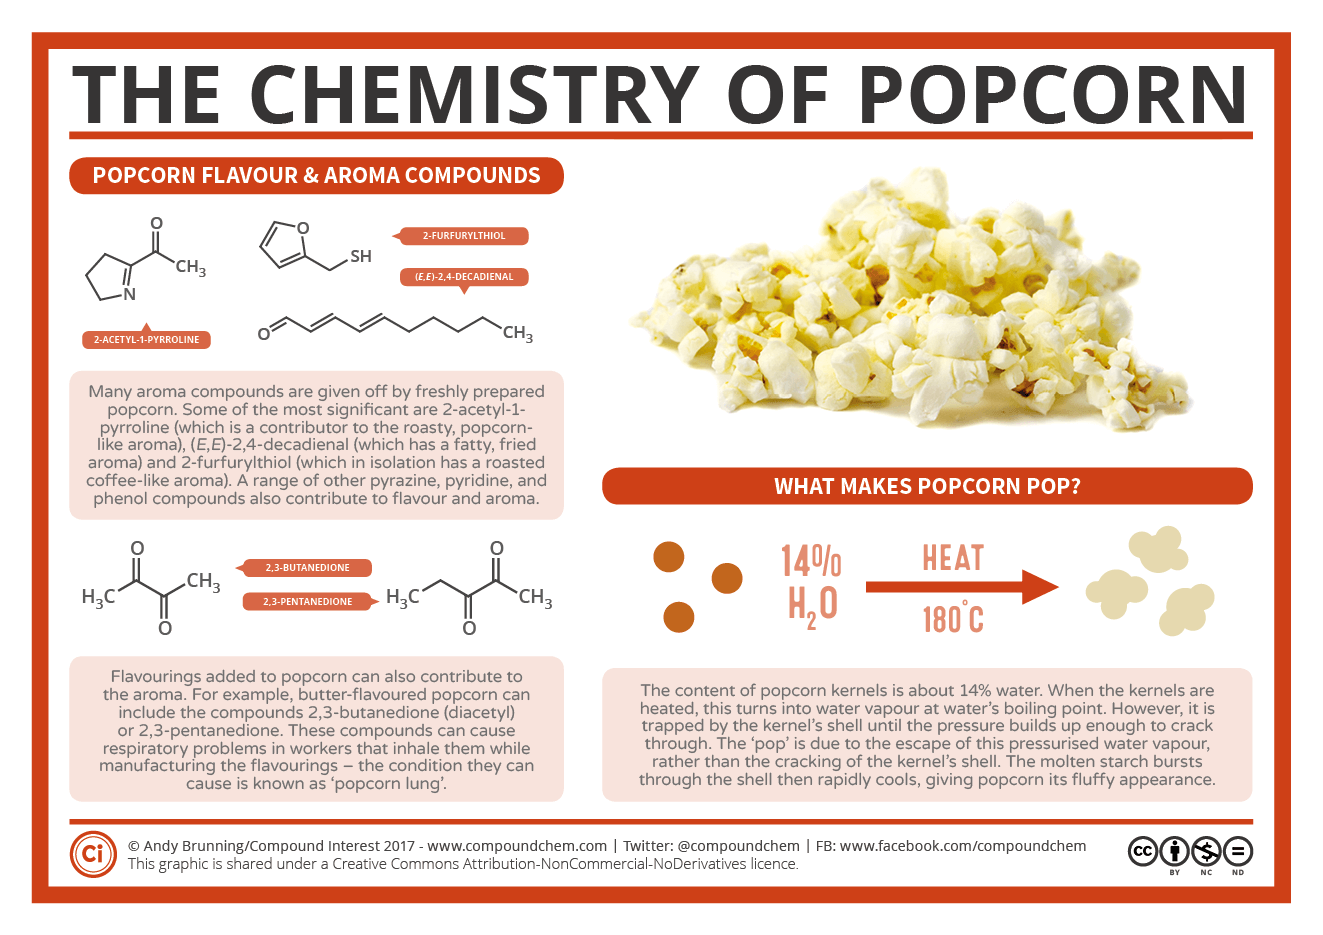 Infographic on the chemistry of popcorn. The infographic highlights some key aroma compounds, including 2-acetyl-1-pyrroline. It also explains what makes popcorn pop: the escape of pressurised water vapour as the kernels are heated.